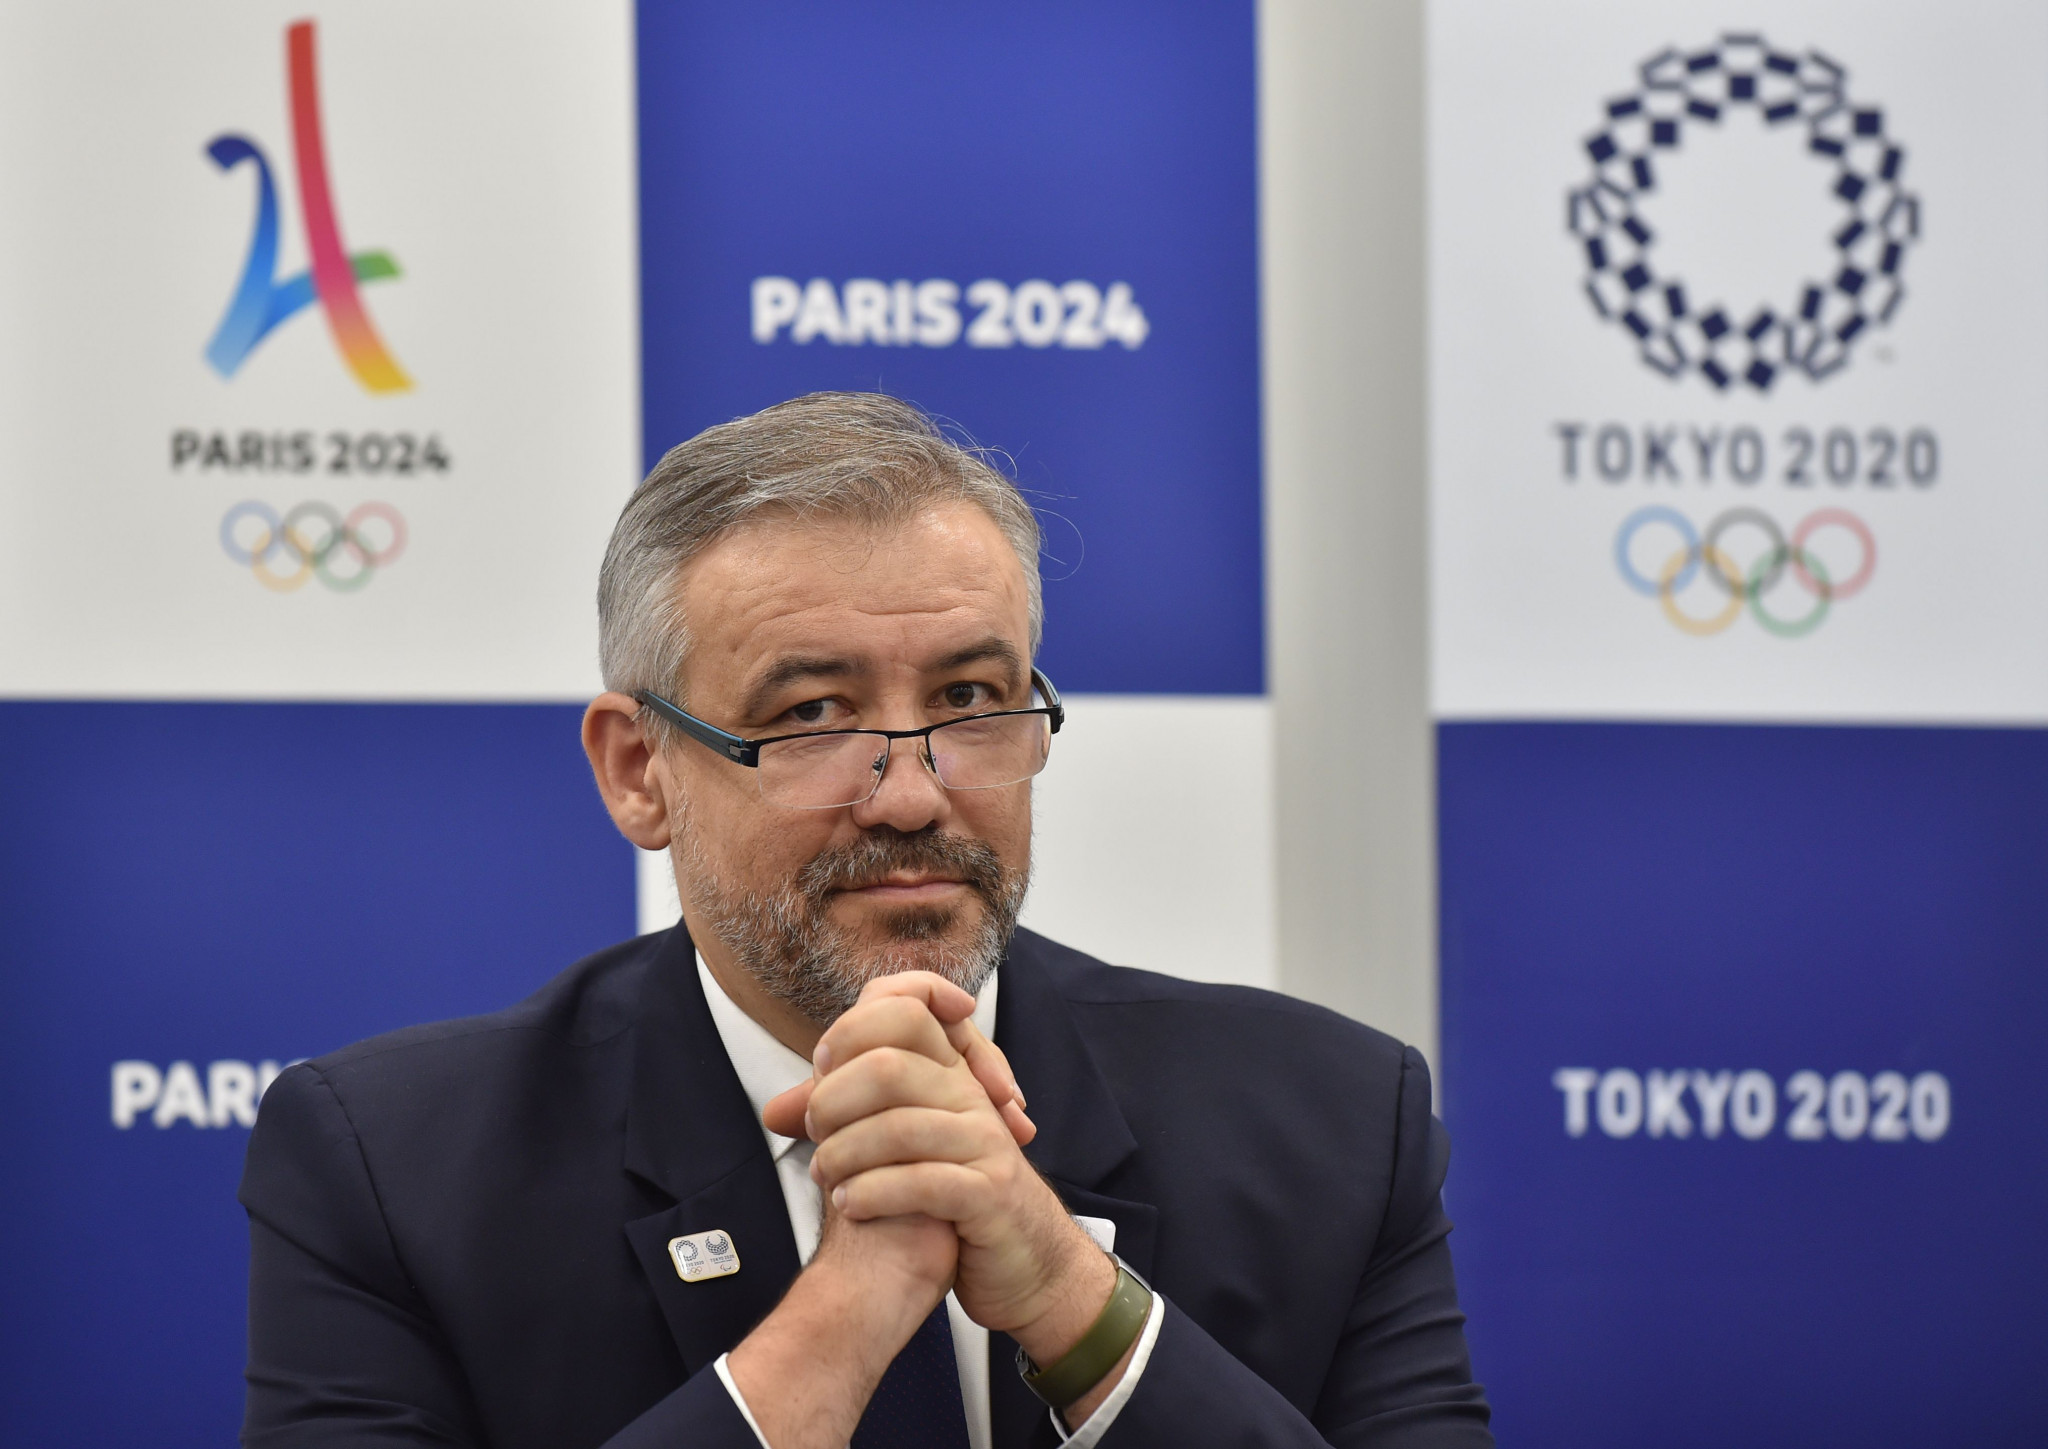 Paris 2024 chief executive Etienne Thobois will head the delegation travelling to Tahiti ©Getty Images